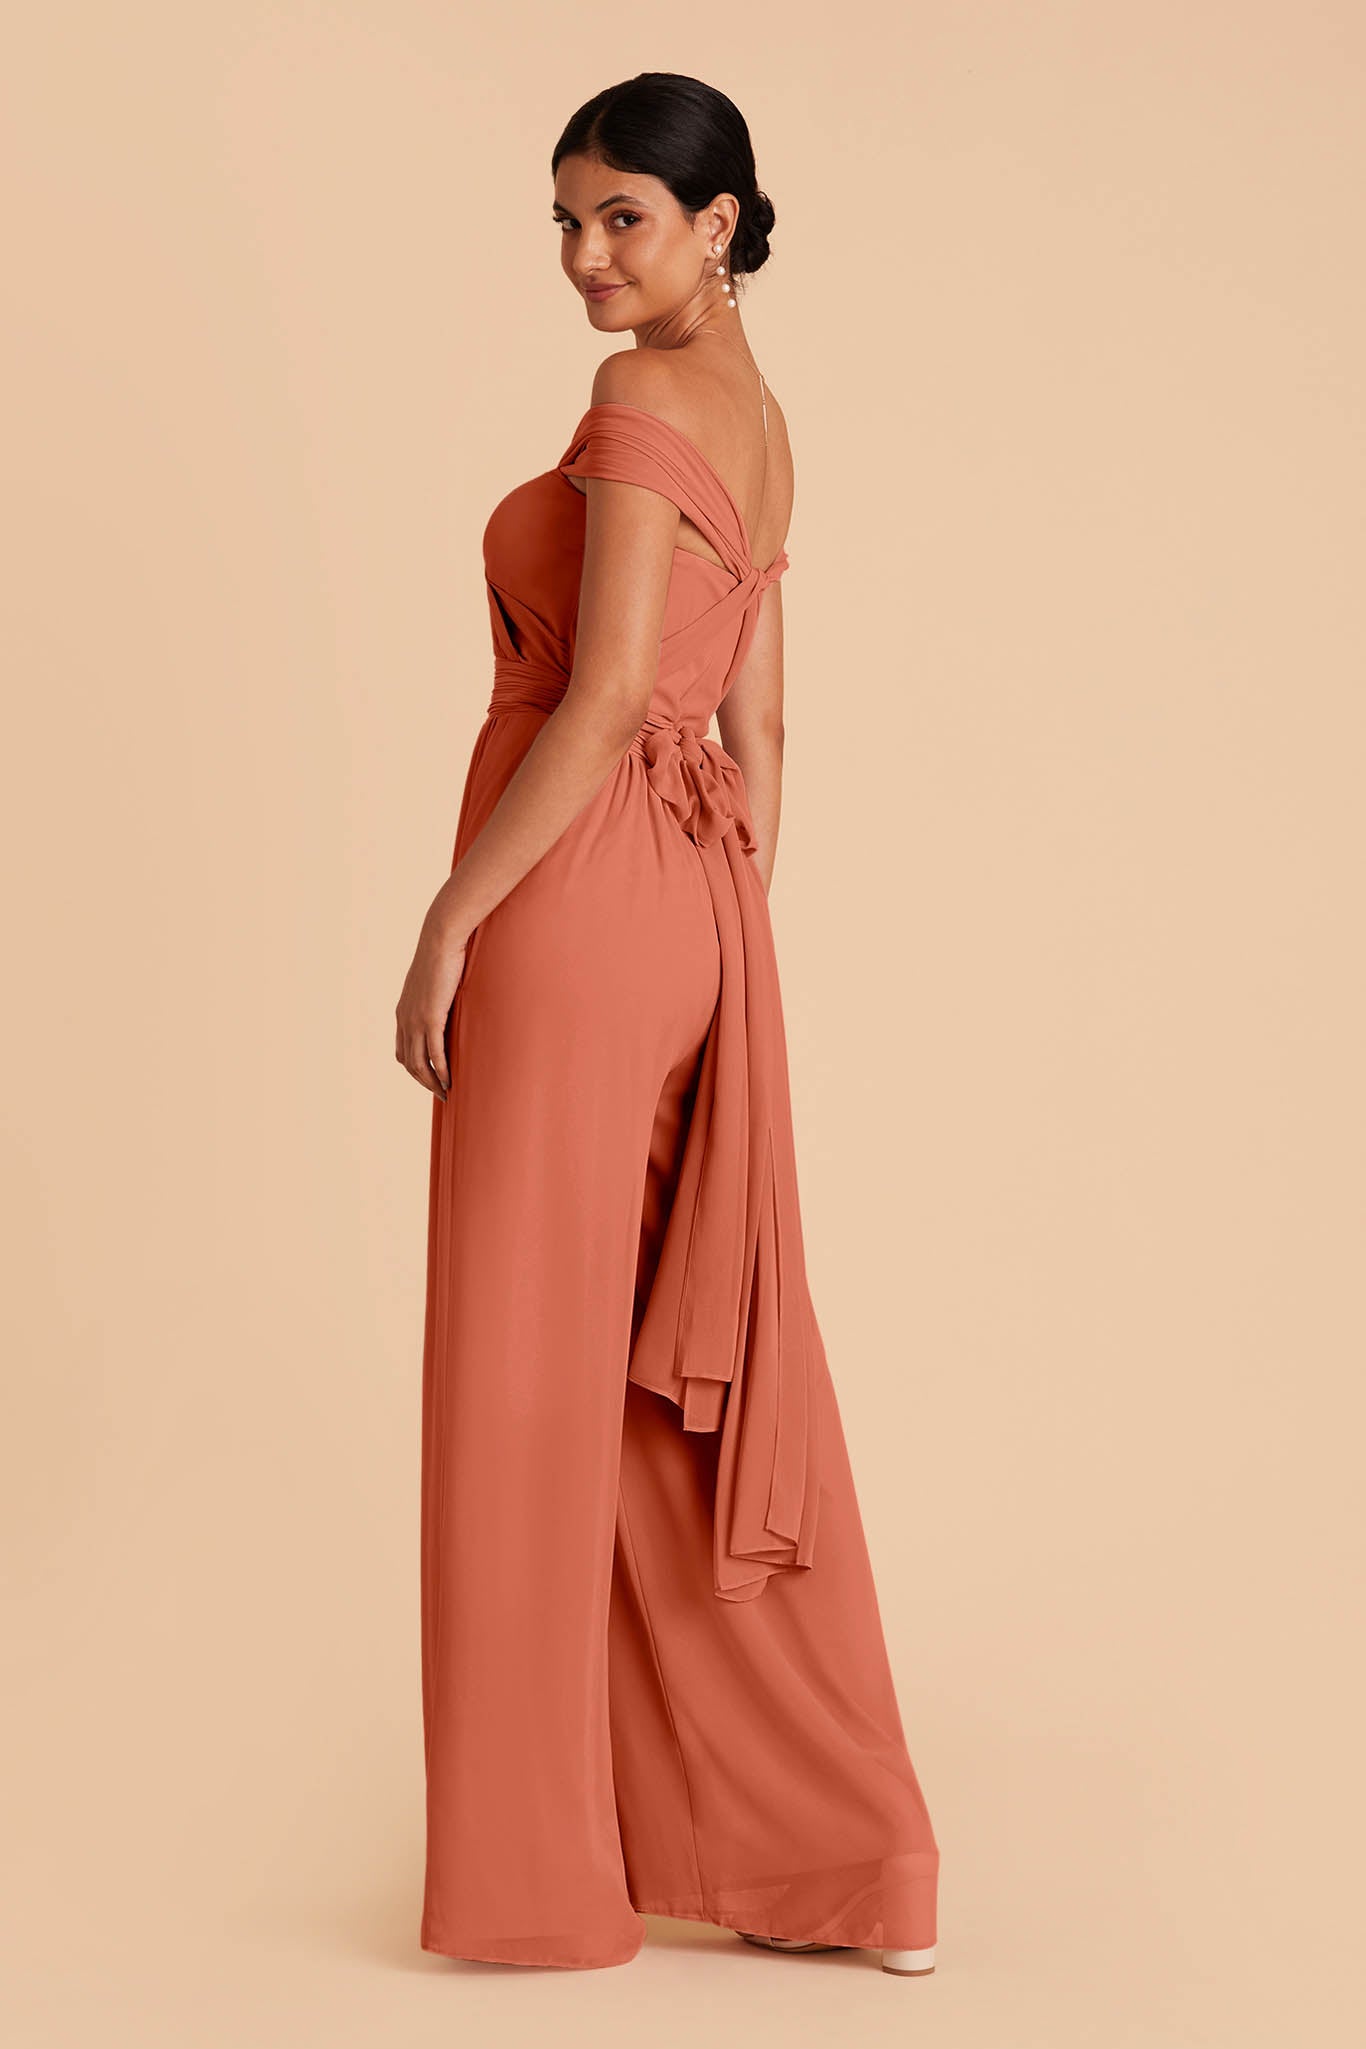 Light orange wedding jumpsuit with sweetheart bodice with convertible neckline tie in the back